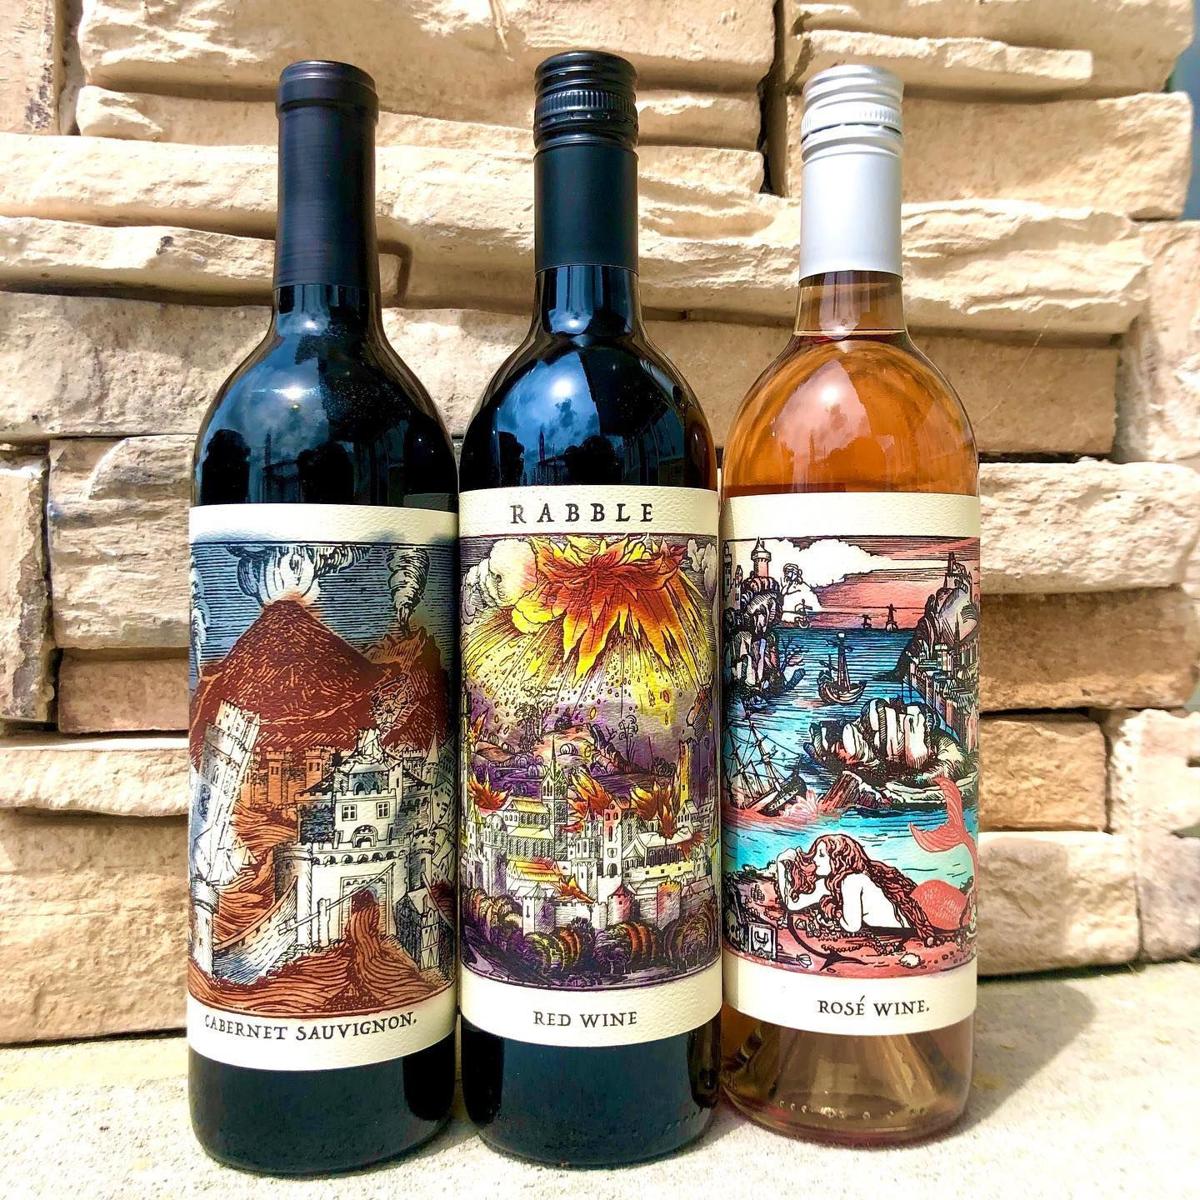 Paso Robles Rabble Wines acquired by ONeill Vintners ...